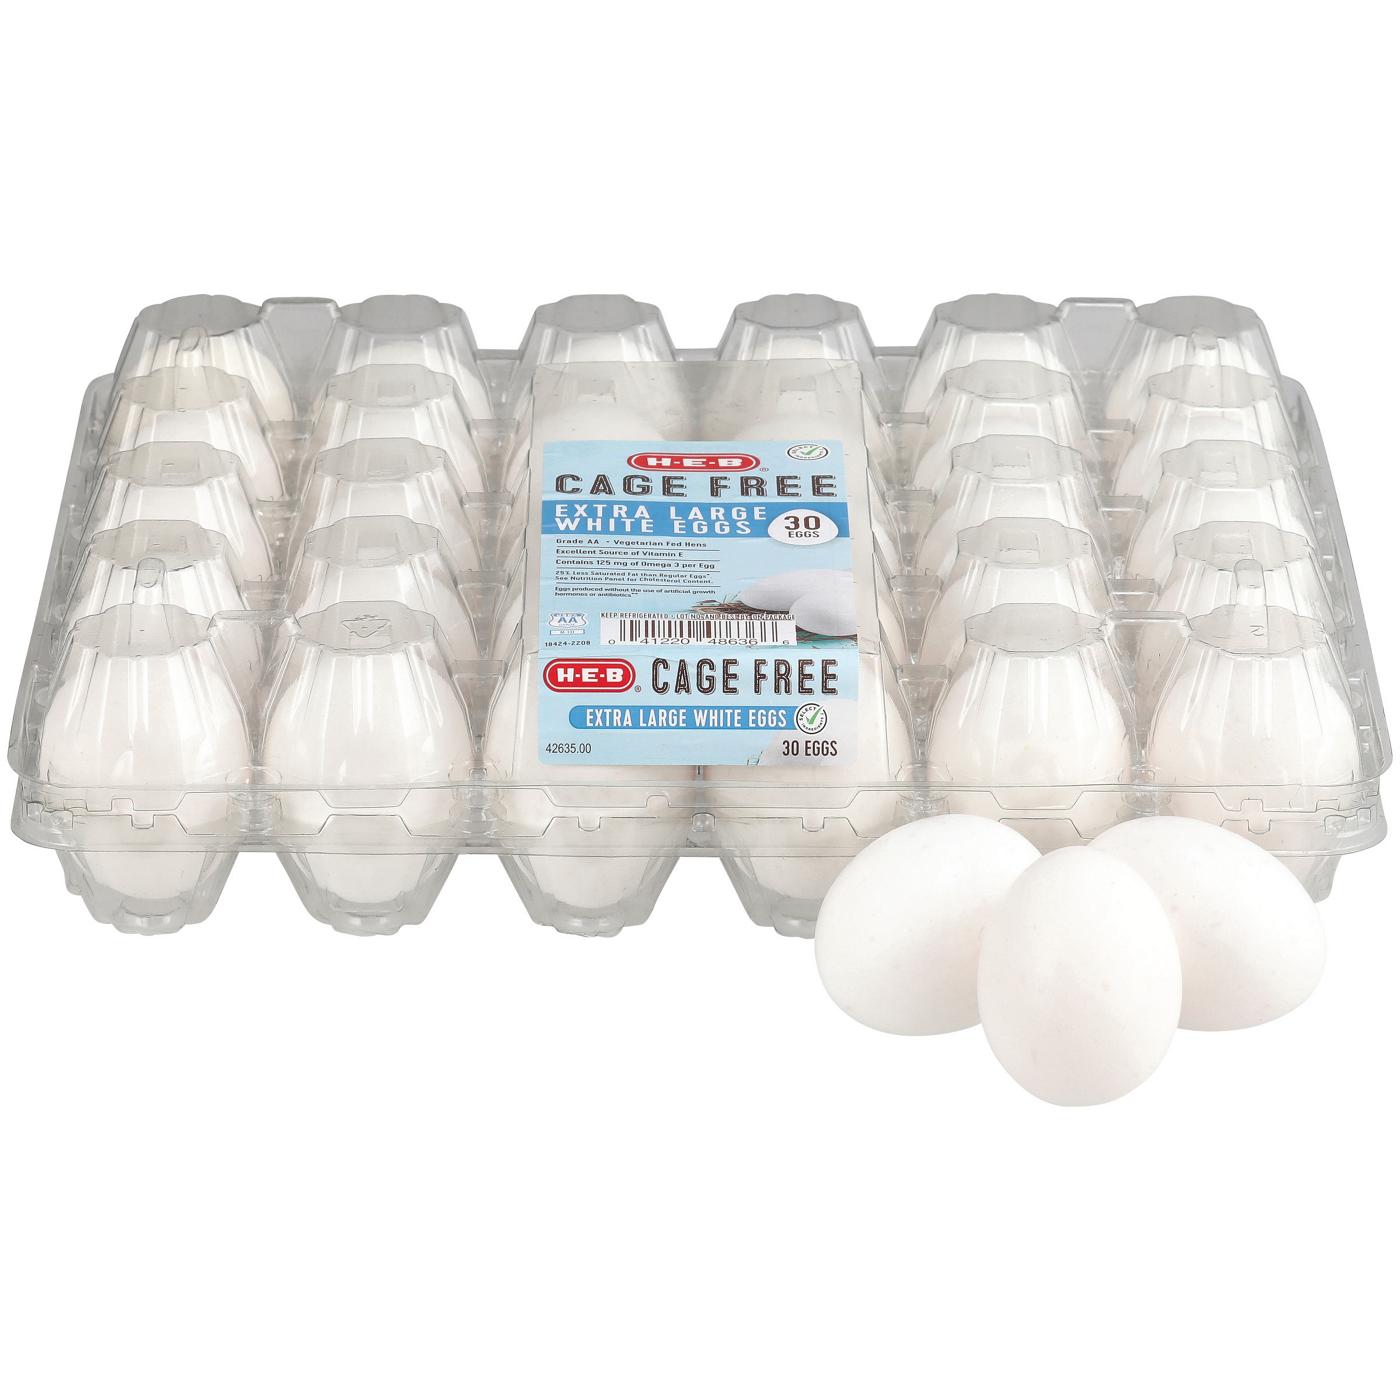 H-E-B Grade AA Cage Free Extra Large White Eggs; image 1 of 6